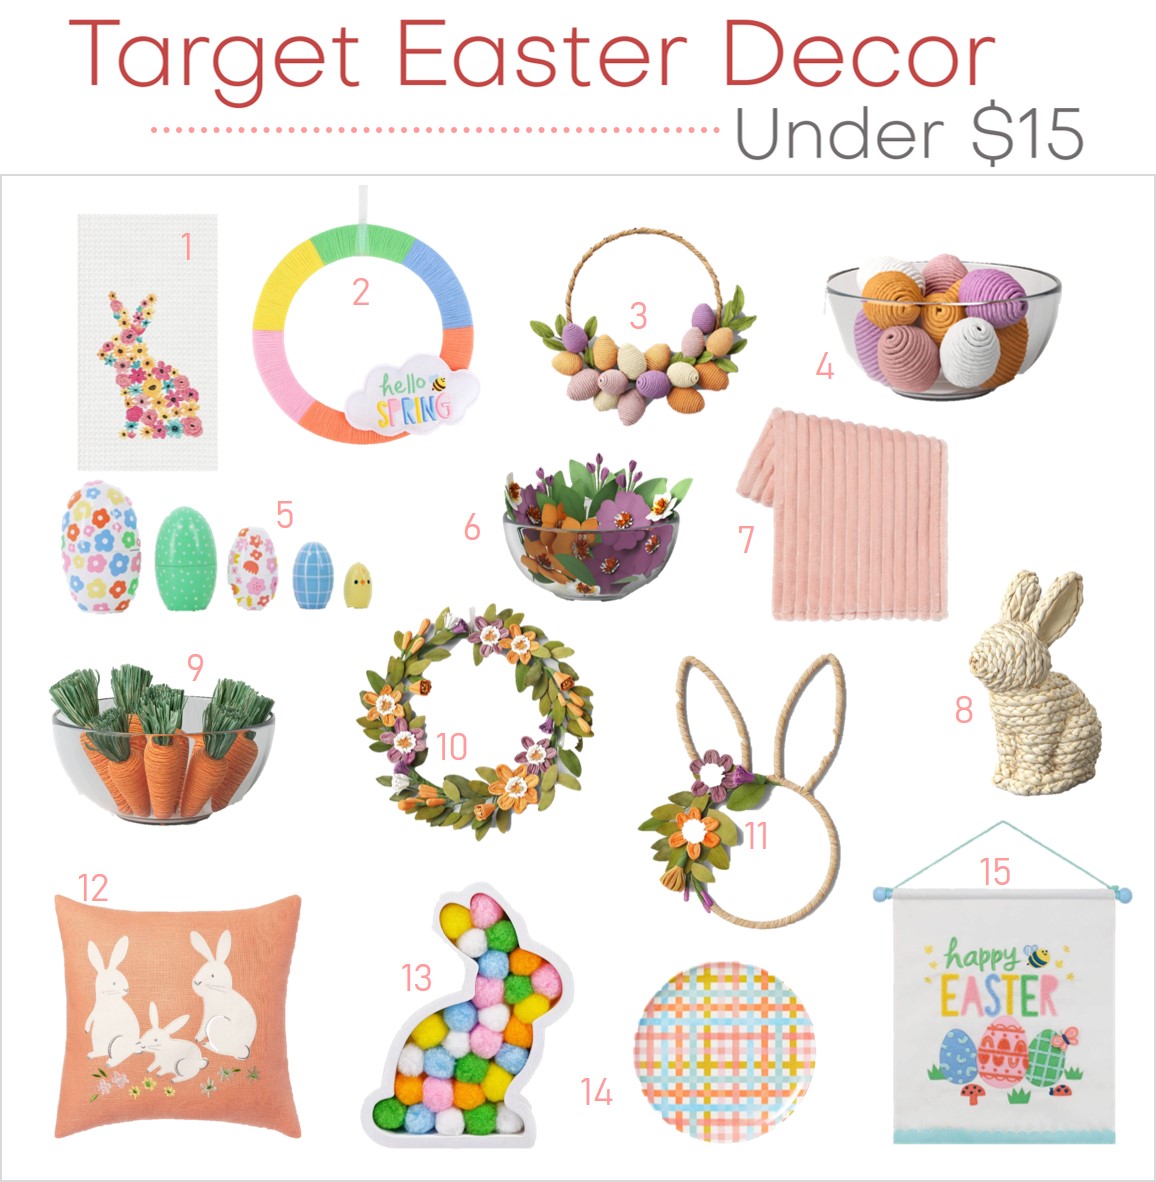 Target Easter Decor - Kelly in the City